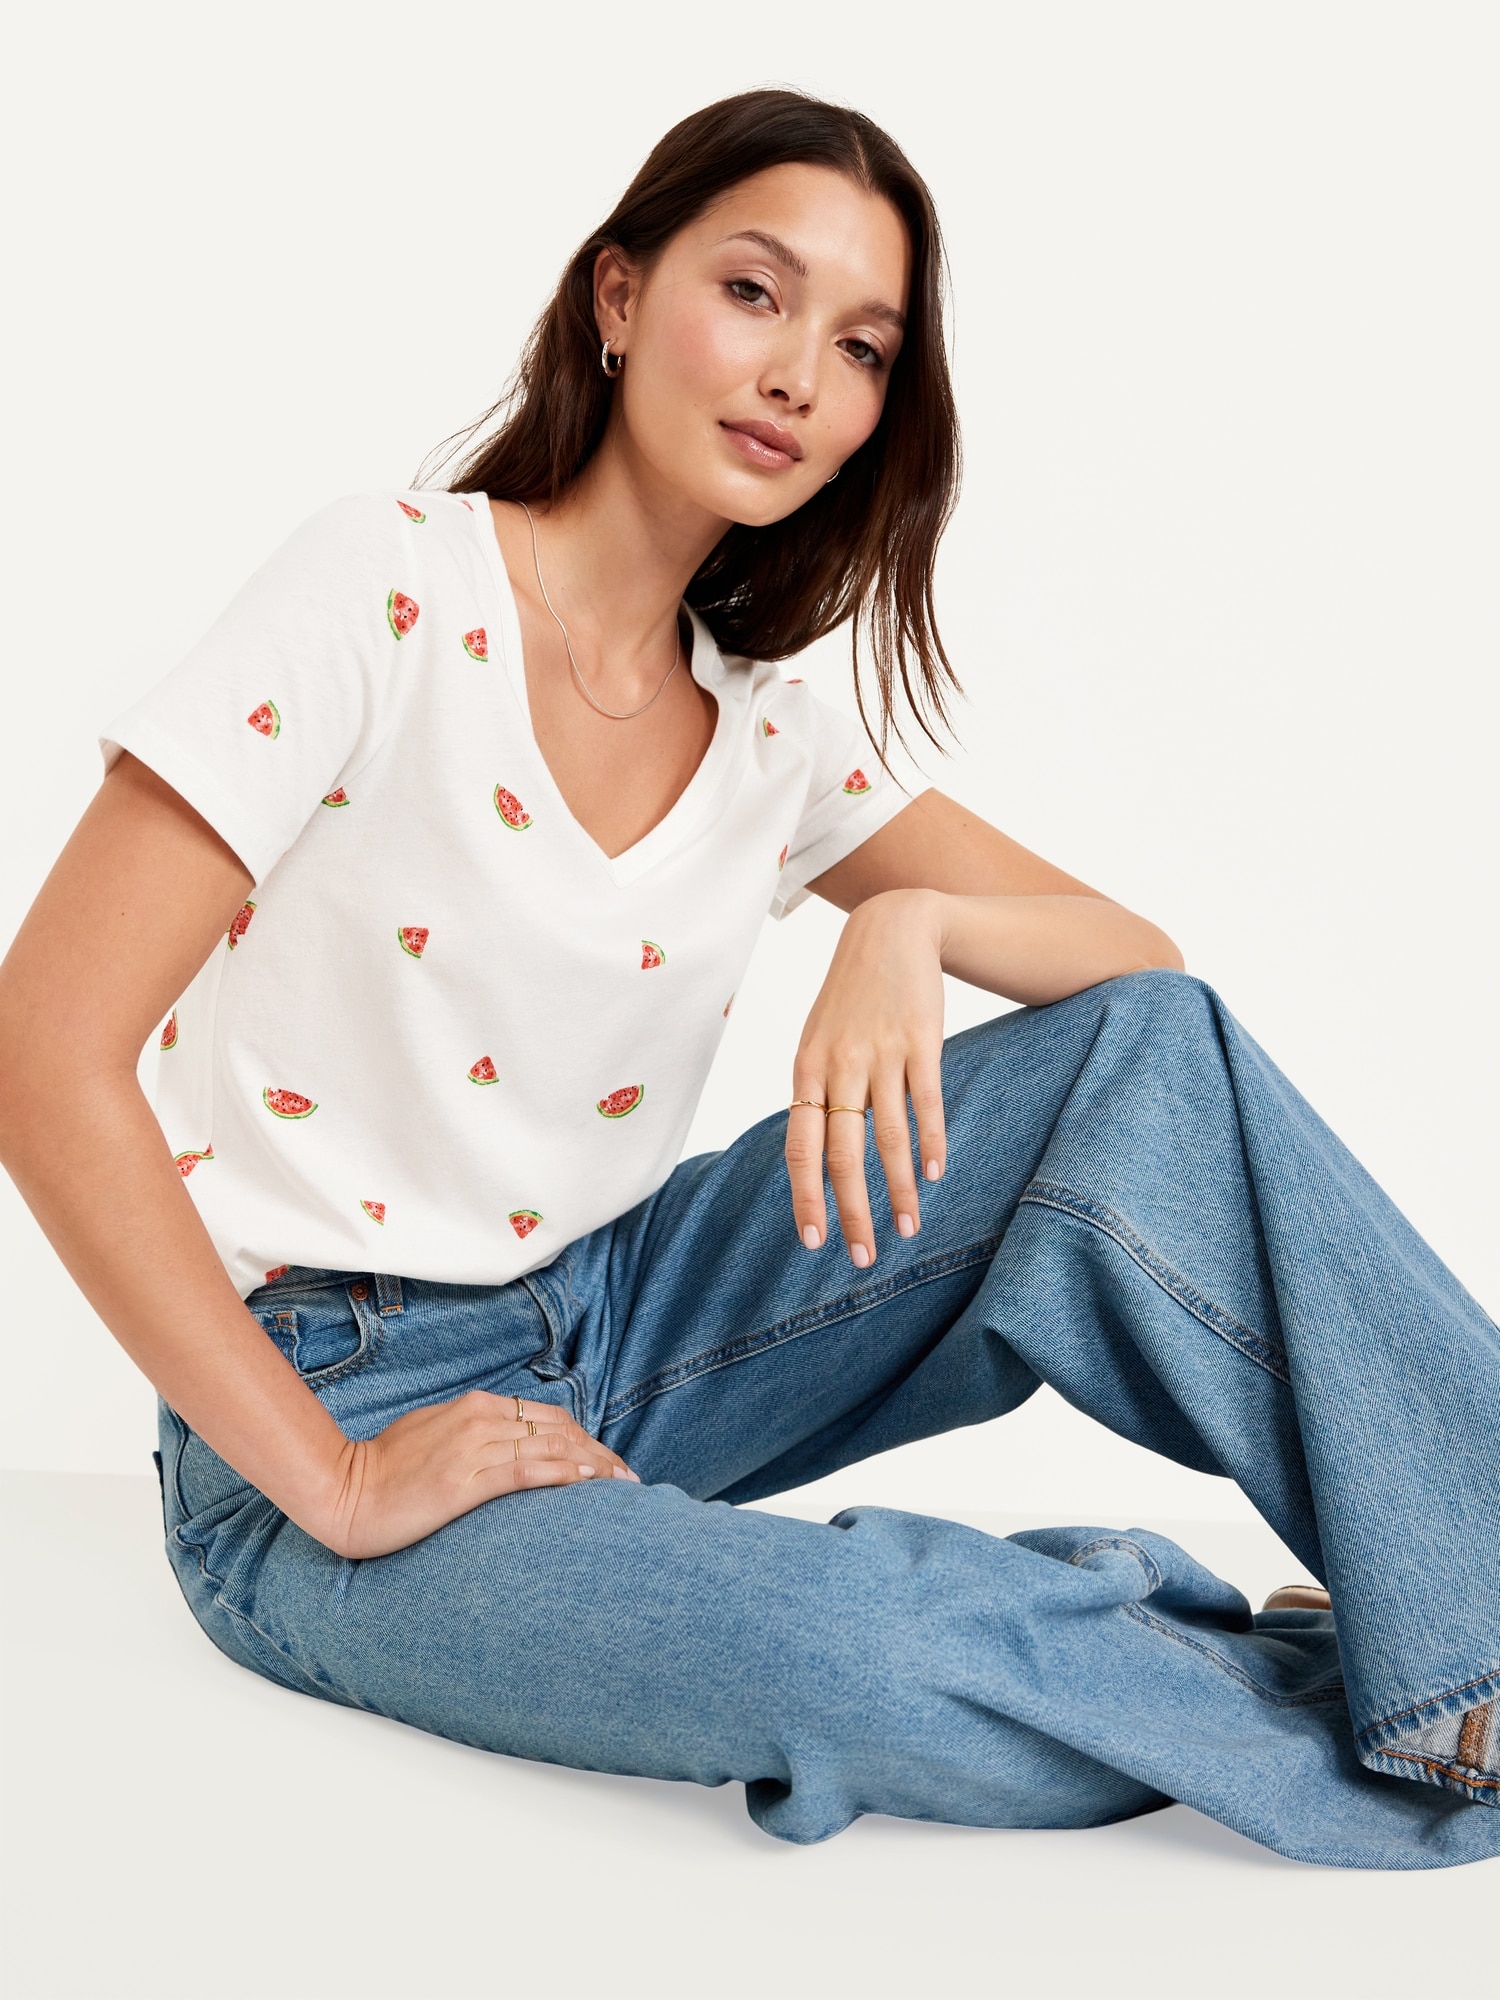 Up to 85% Off Old Navy Clearance  $2 Tees, $3.48 Dresses, $6.63